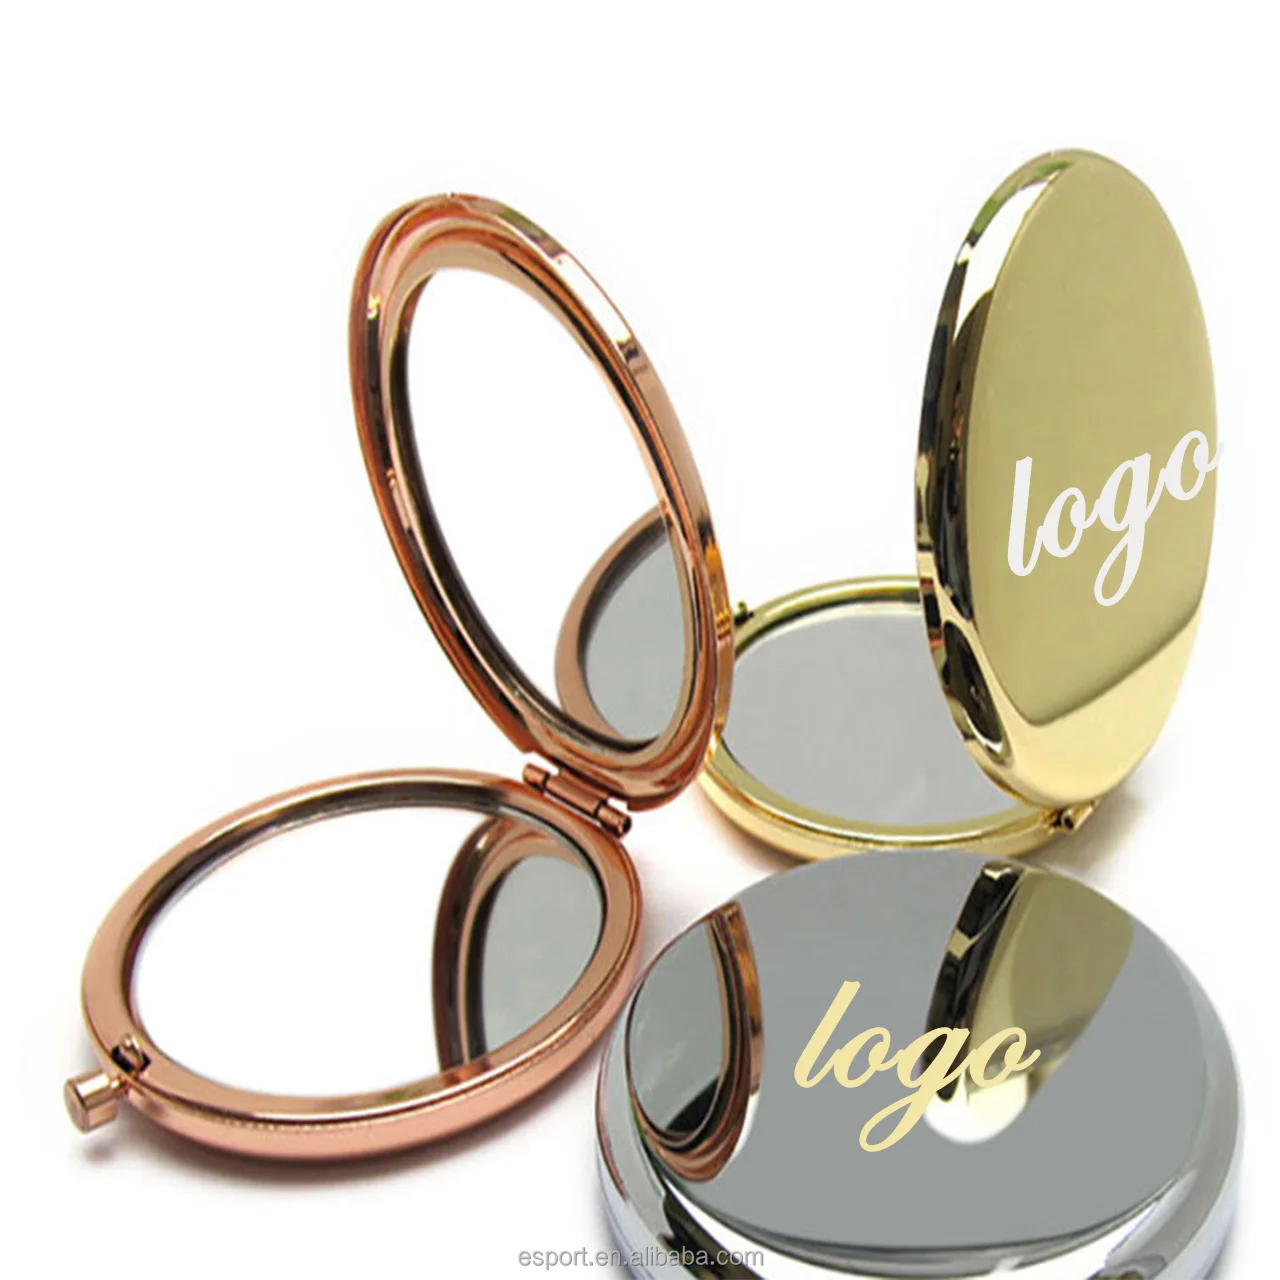 

cover purse Customized Logo Souvenir Round Double Sides Metal Pocket Mirror Gold Plated Make up Compact Mirror Wholesale, Silver,gold,rose gold